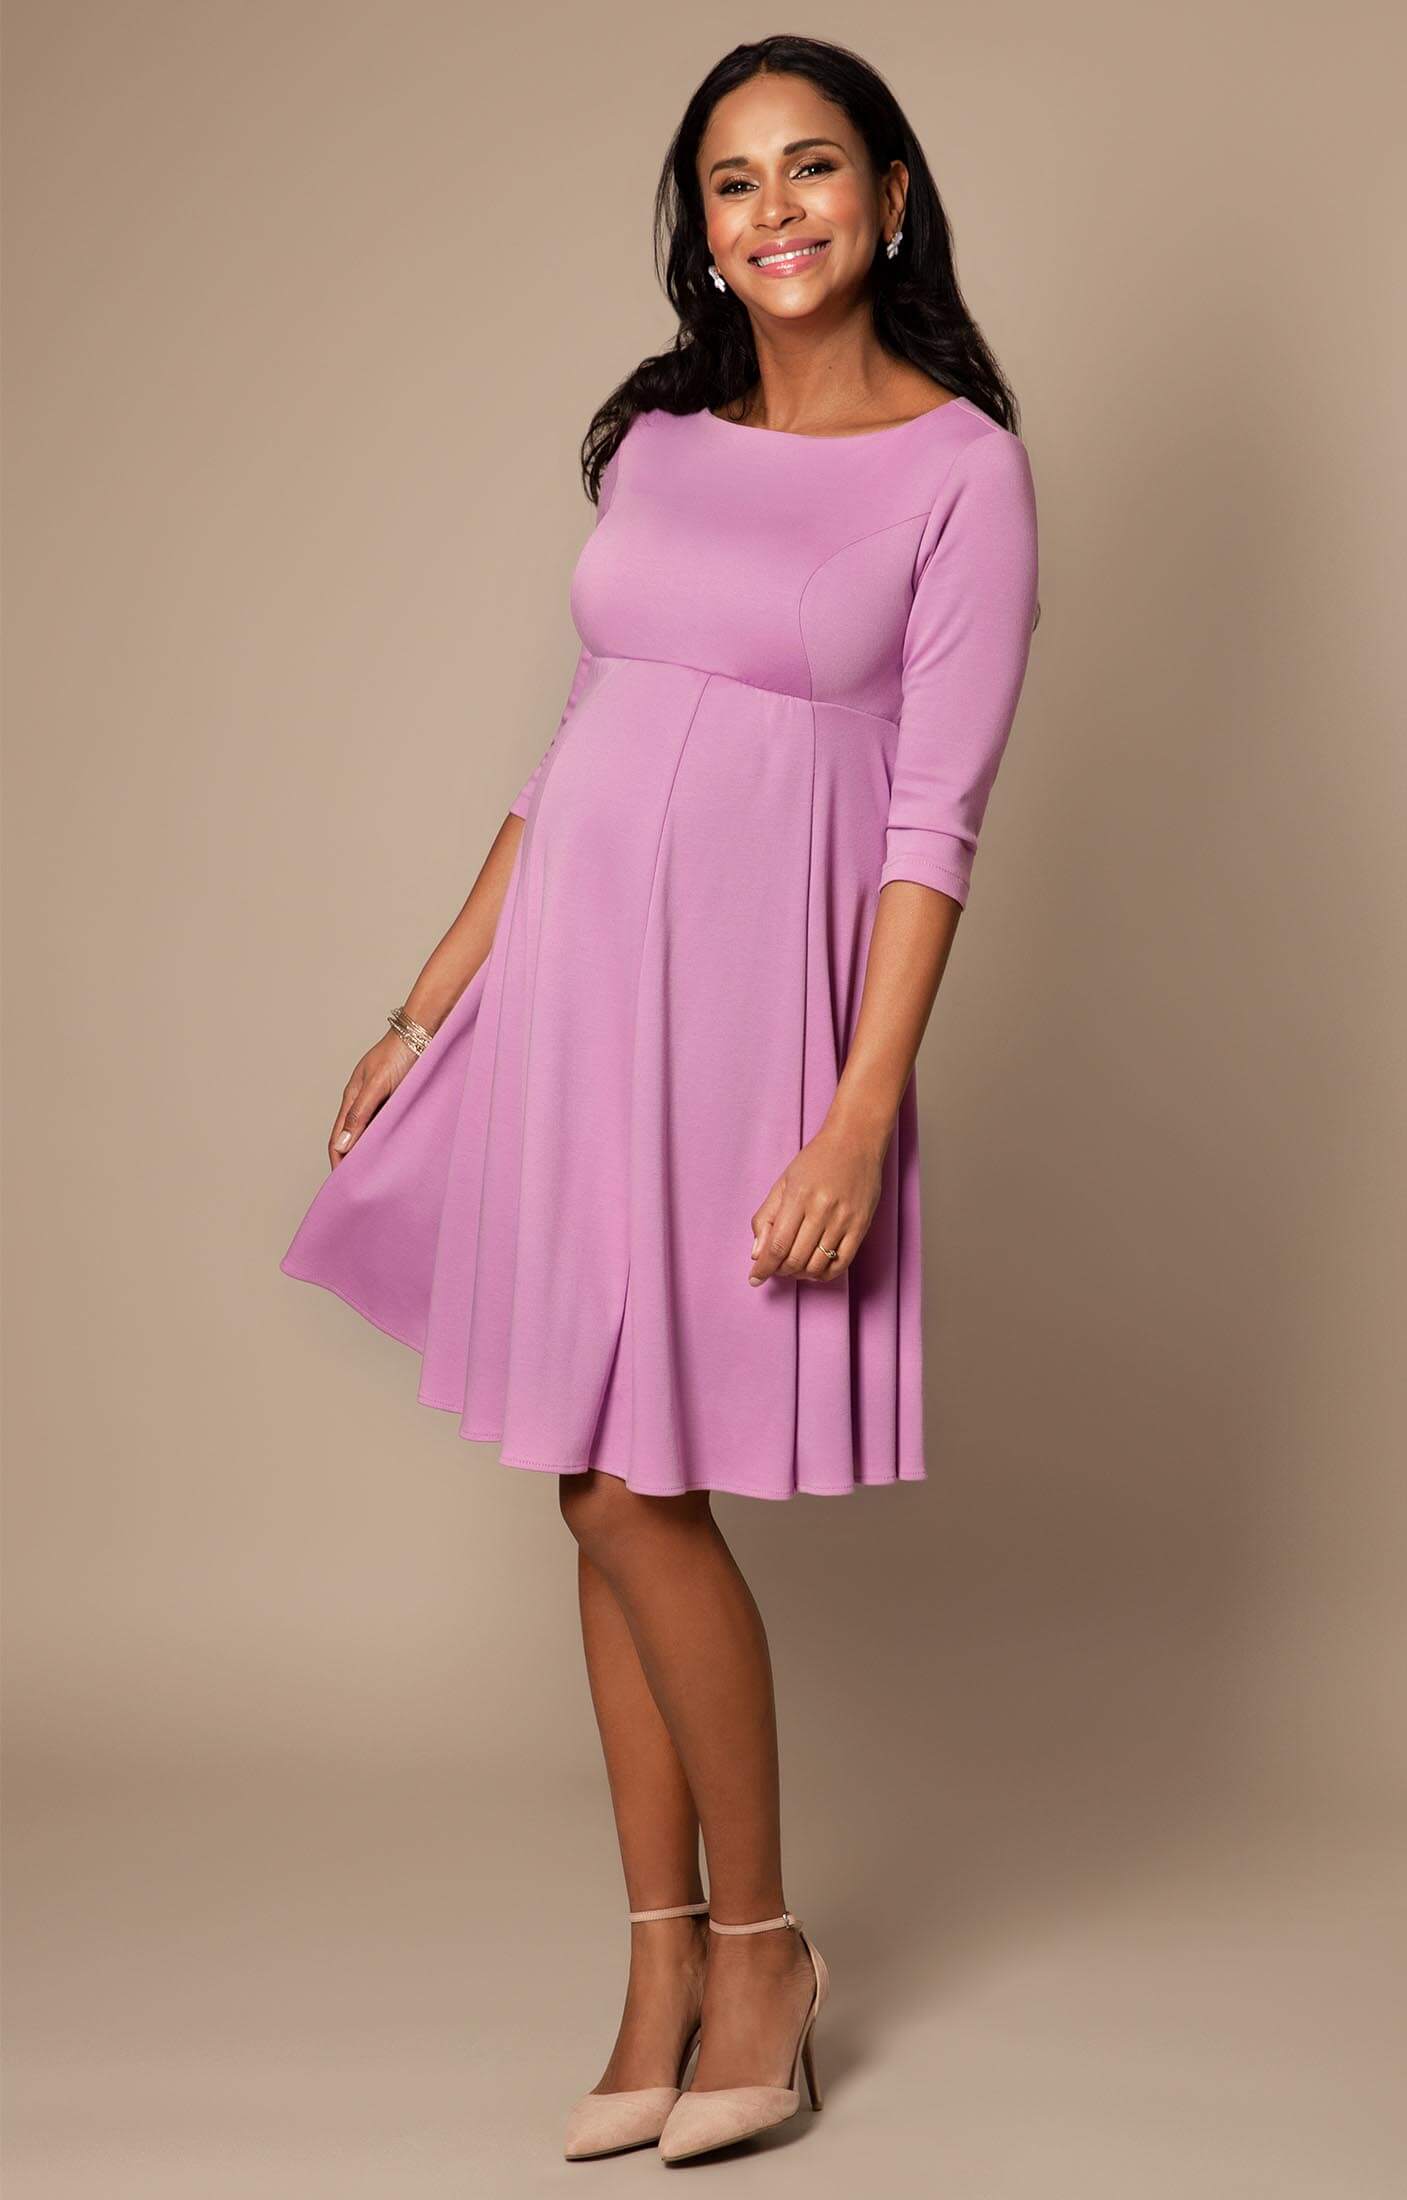 Sienna Short Maternity Dress With Sleeves In Lilac Pink - Maternity ...